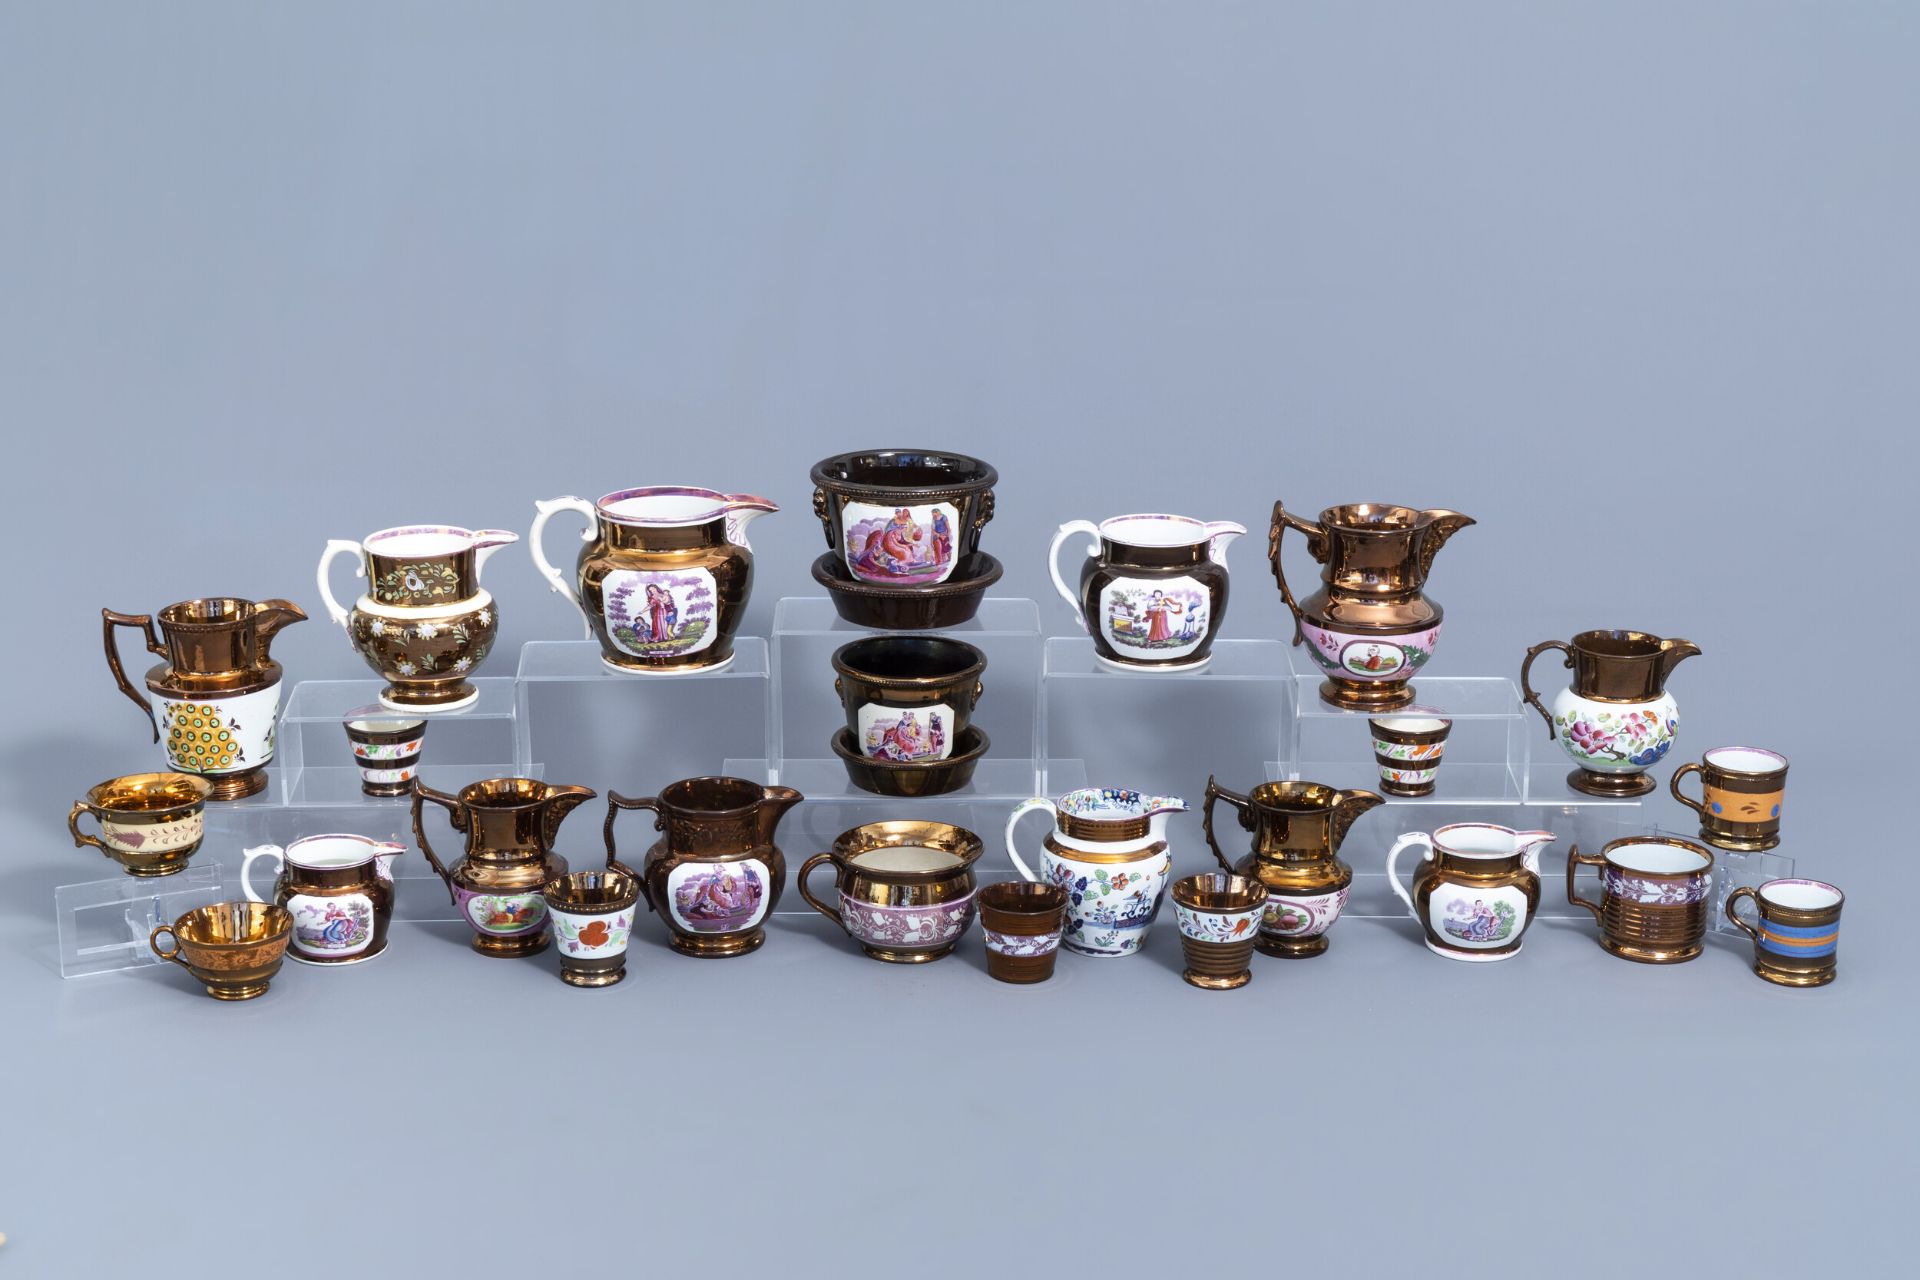 A varied collection of English lustreware items, 19th C.